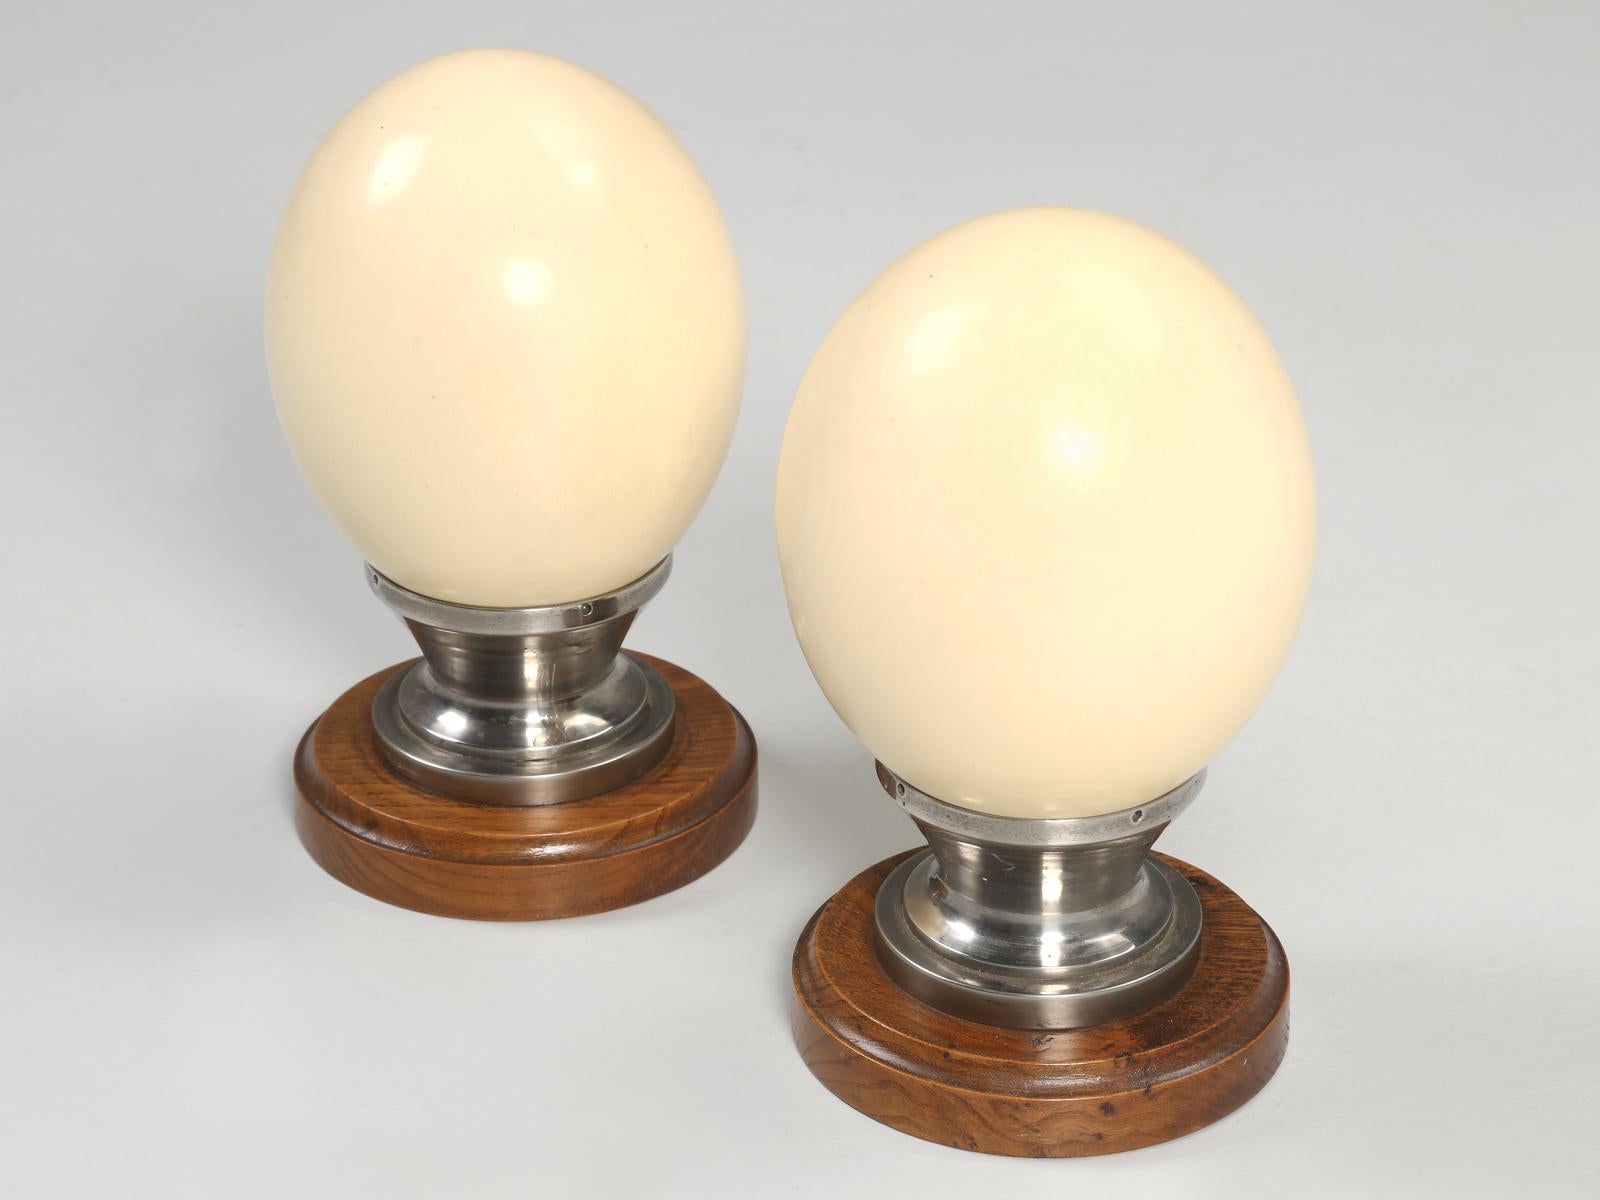 Pair of beautifully mounted Ostrich Eggs on a machined metal and wood base. Imported from France with no visible previous repairs.
One base is dated 3. 12. 1944 or Dec 3rd 1944.